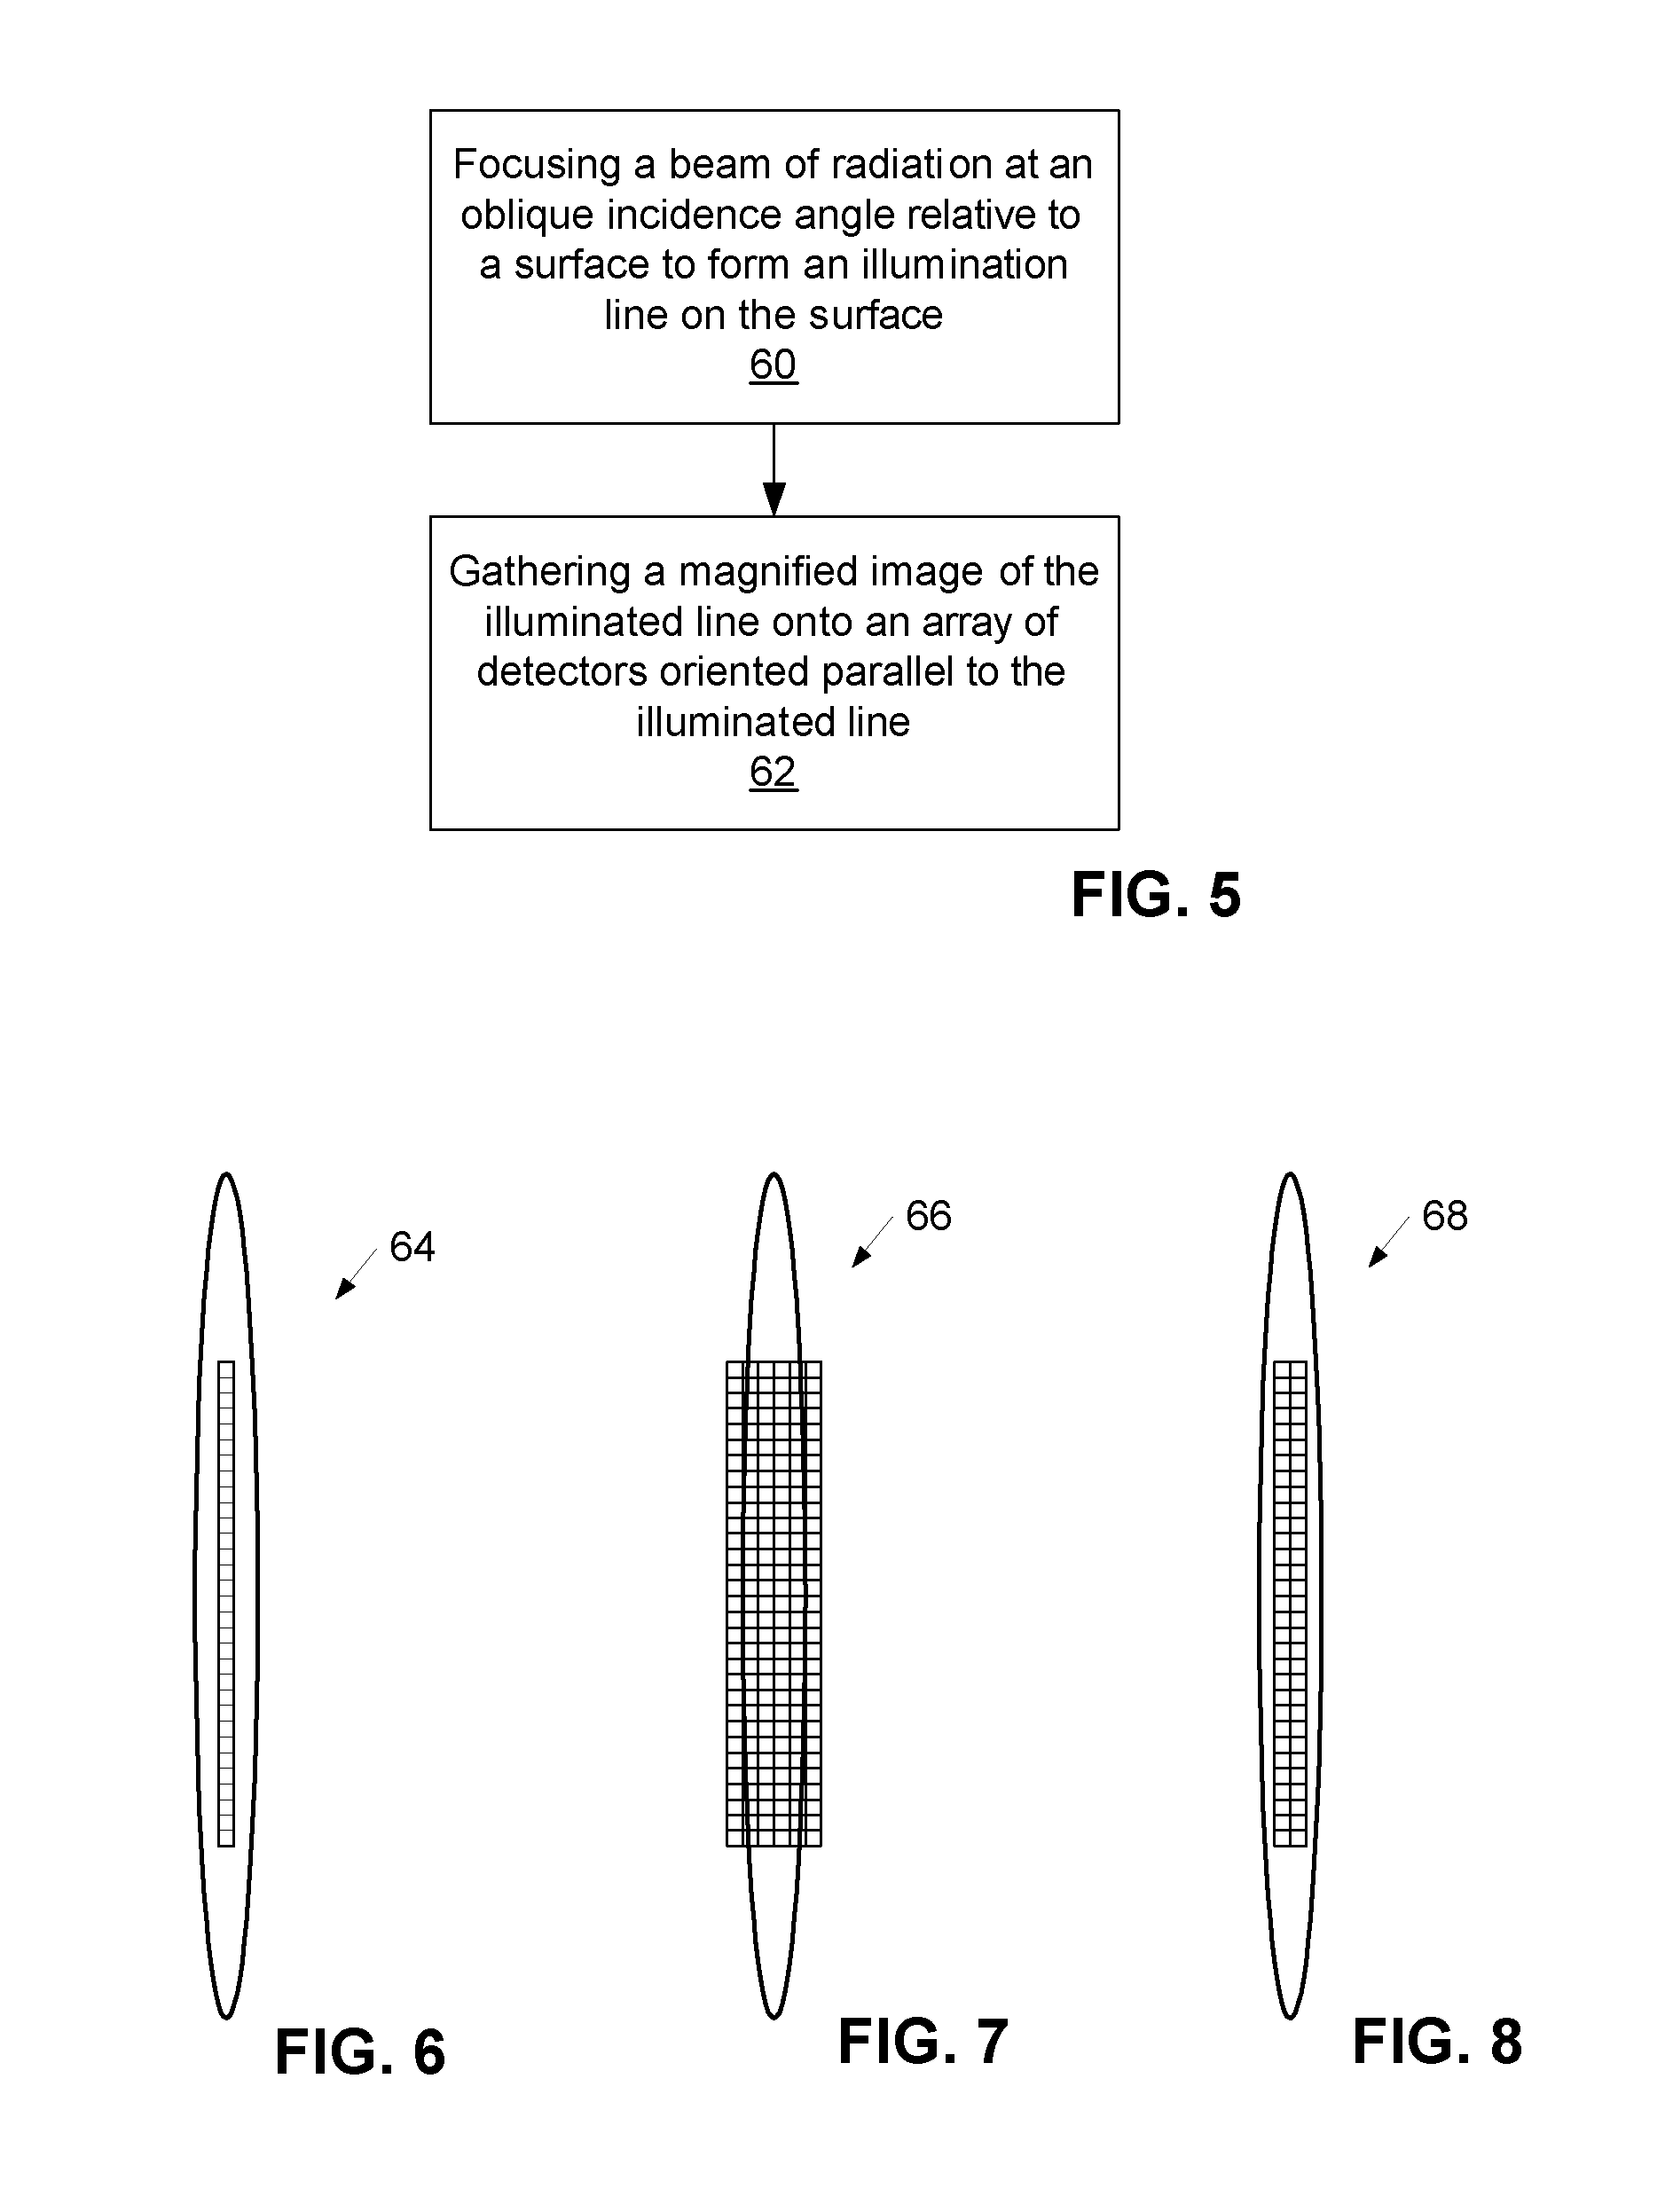 Surface inspection system using laser line illumination with two dimensional imaging